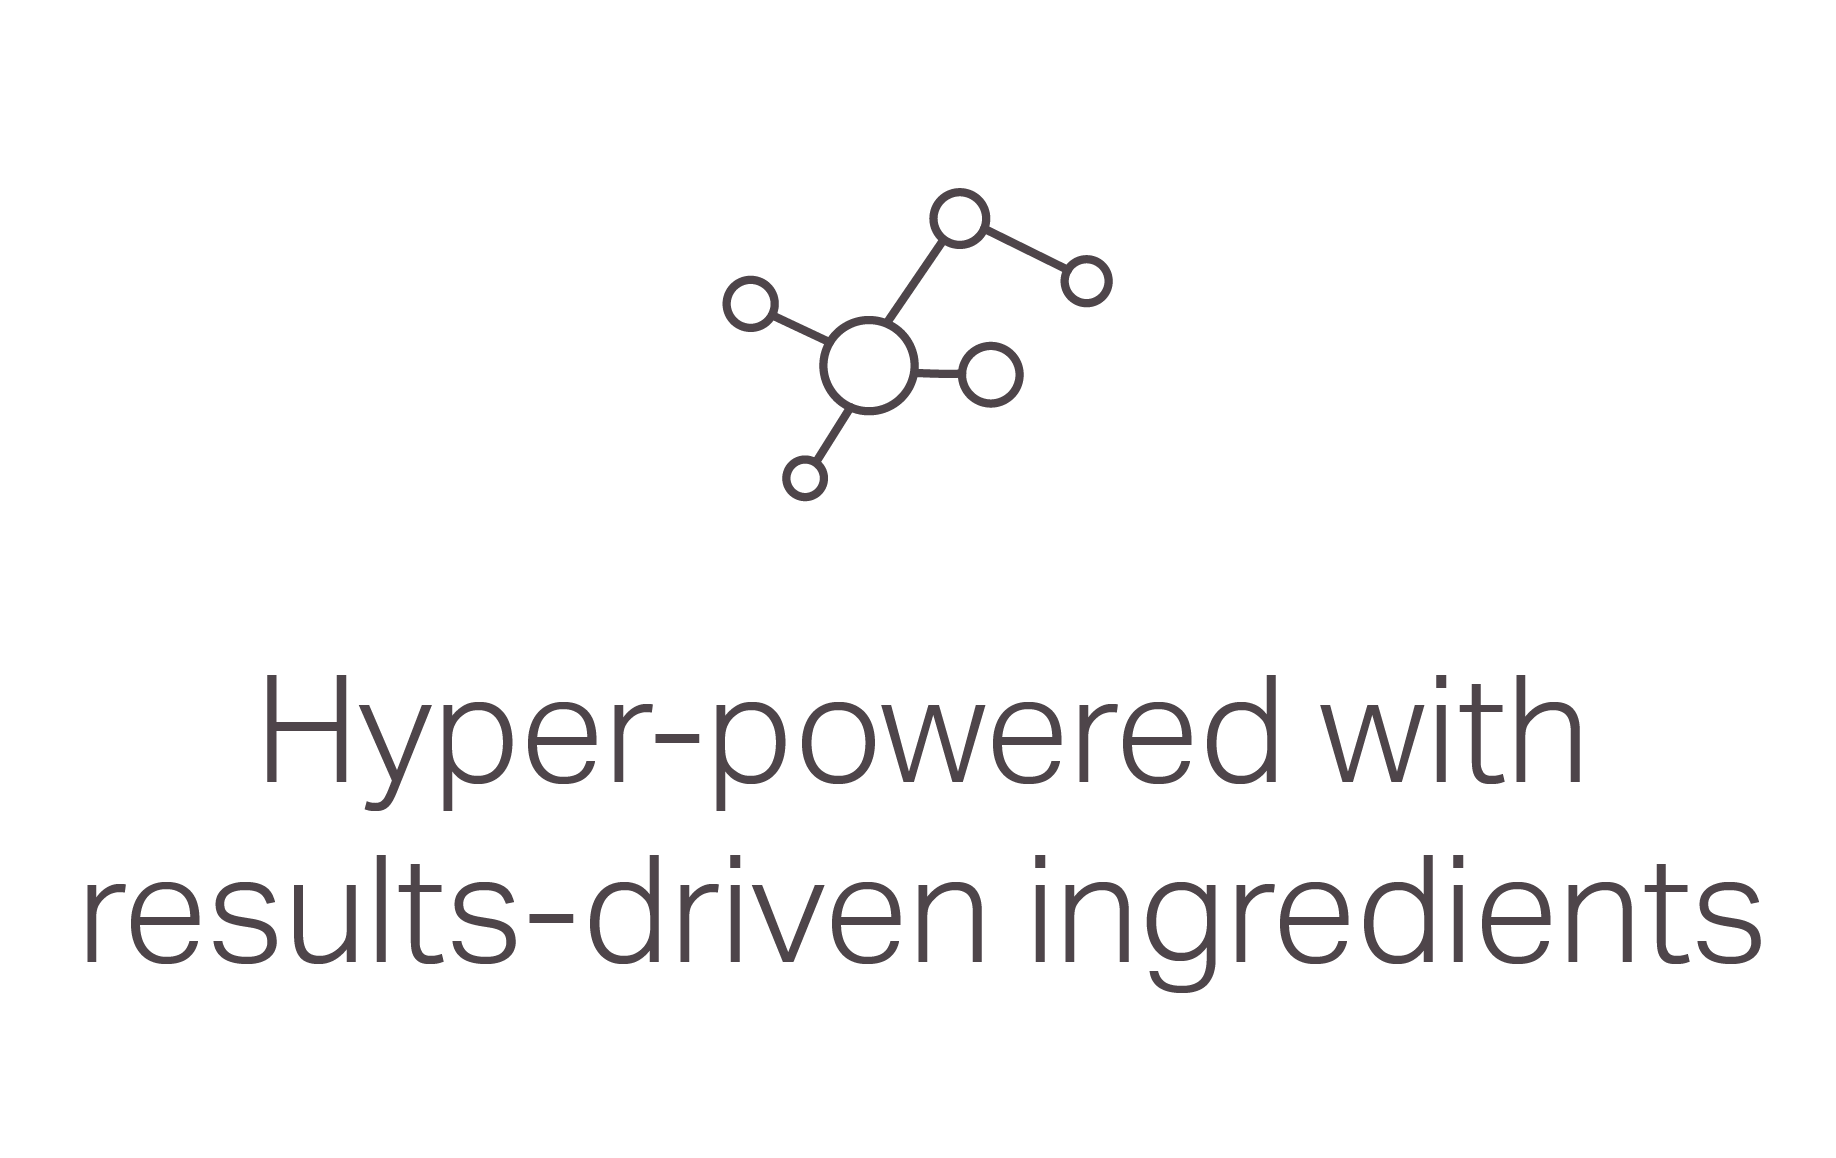 Hyper-powered with results-driven ingredients